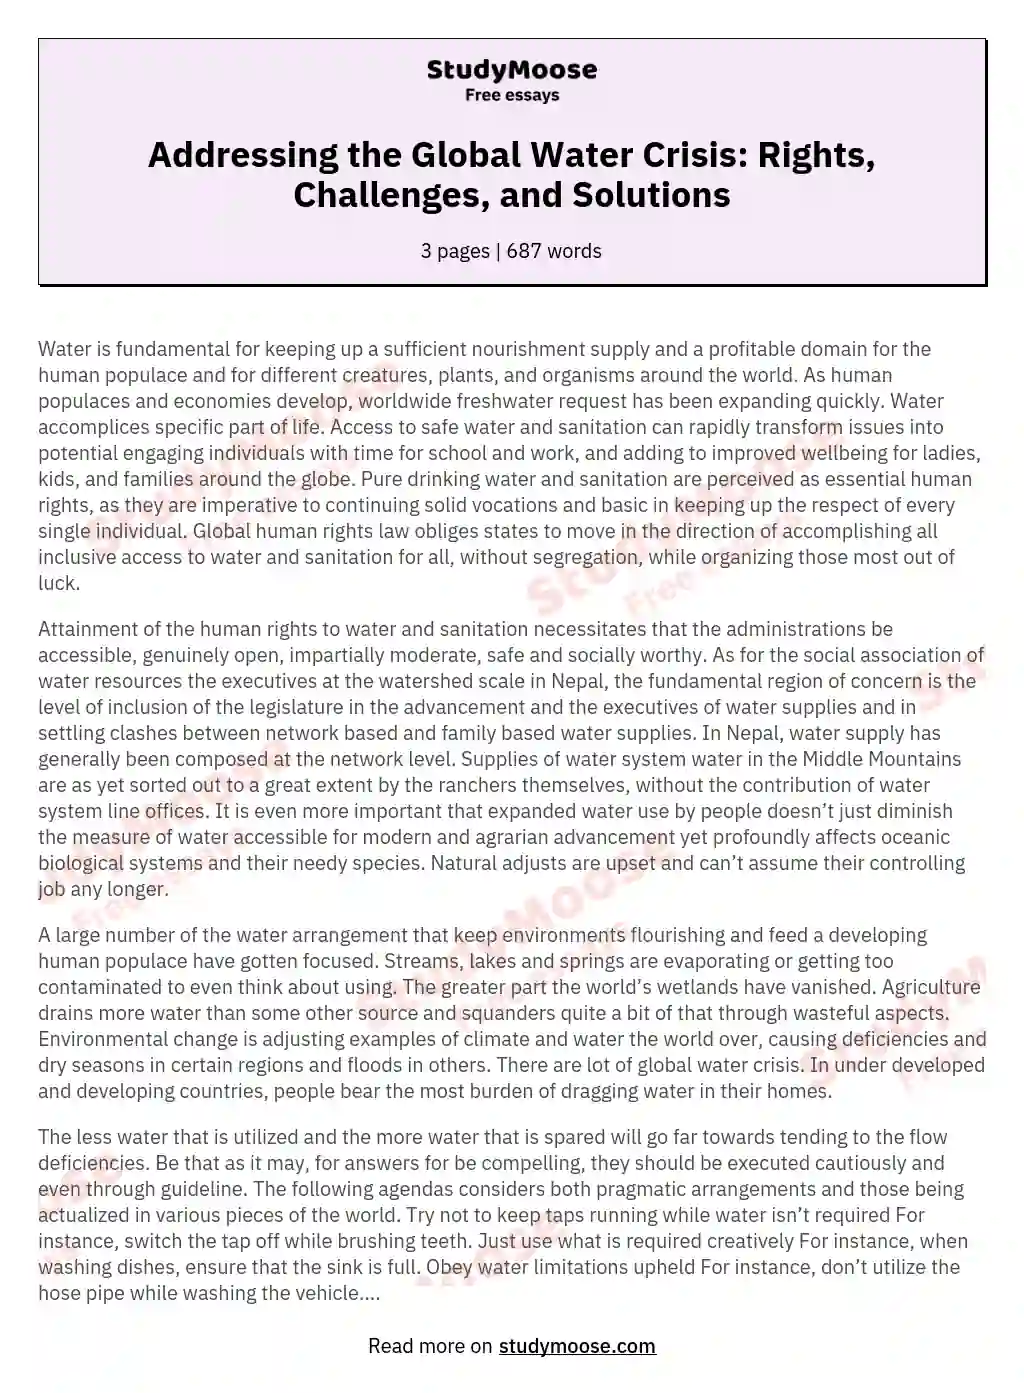 Addressing the Global Water Crisis: Rights, Challenges, and Solutions essay